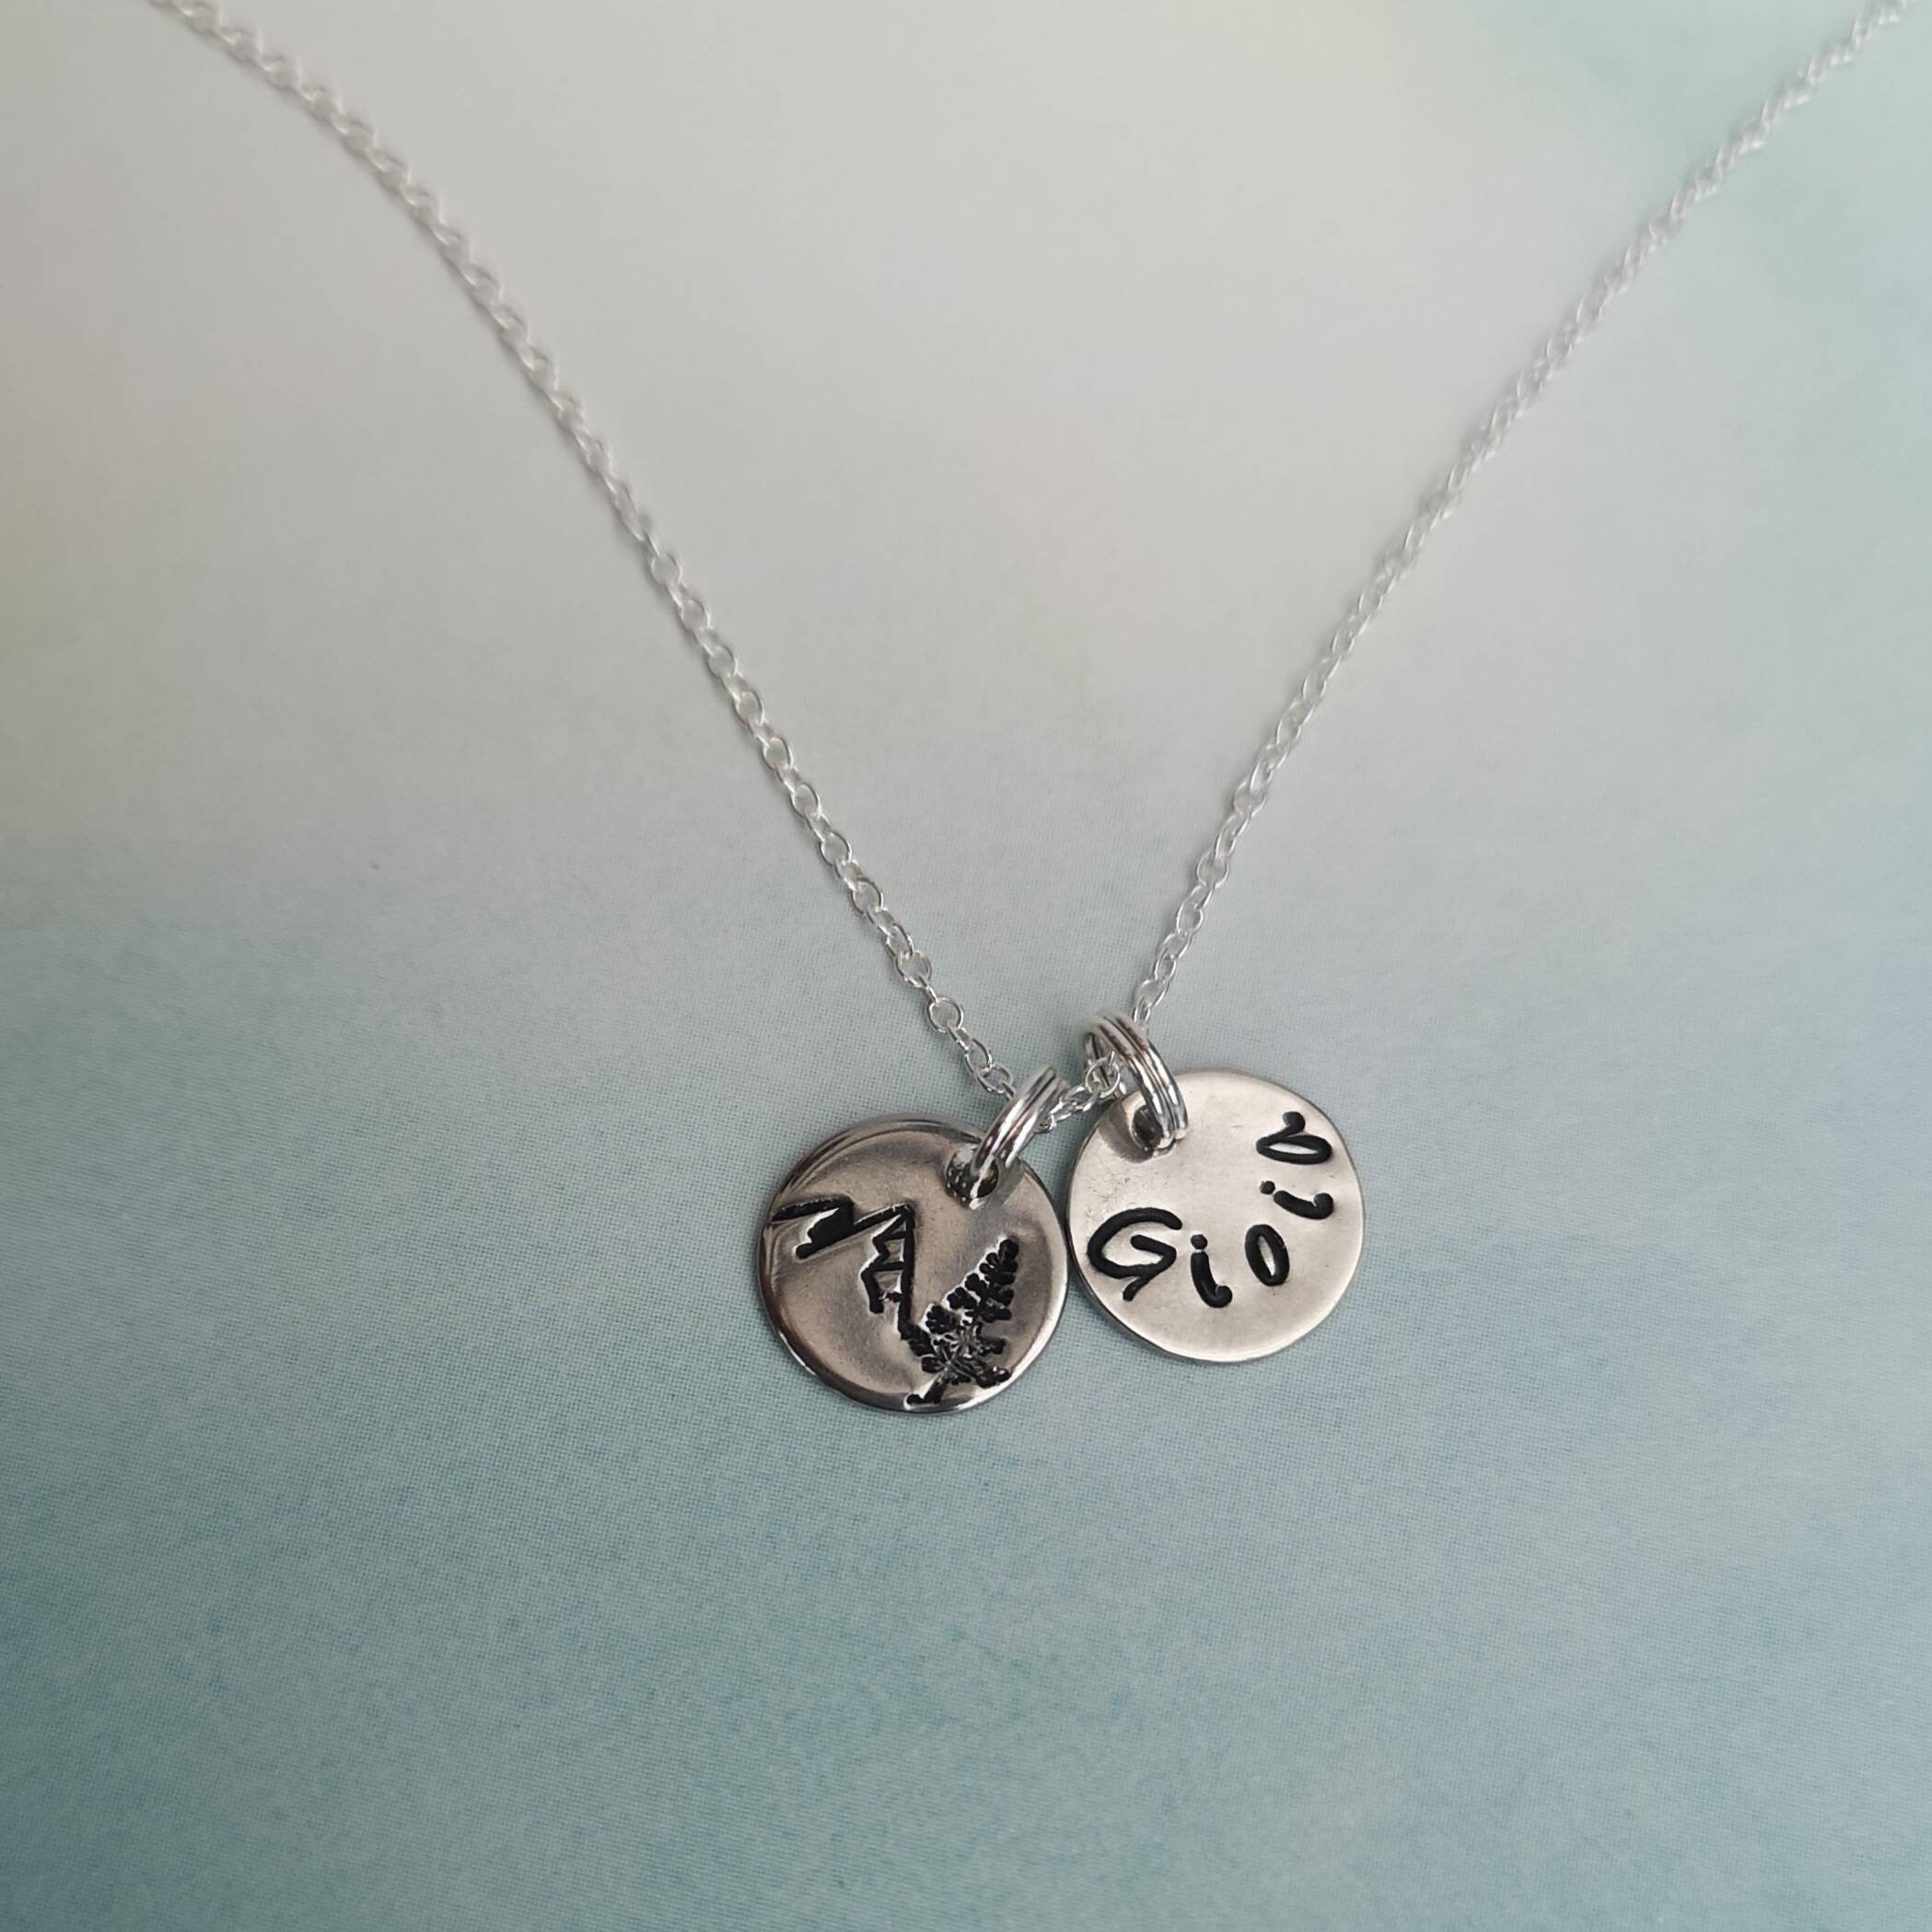 Hand Stamped Personalised Necklace Sterling Silver Chain With - Etsy UK